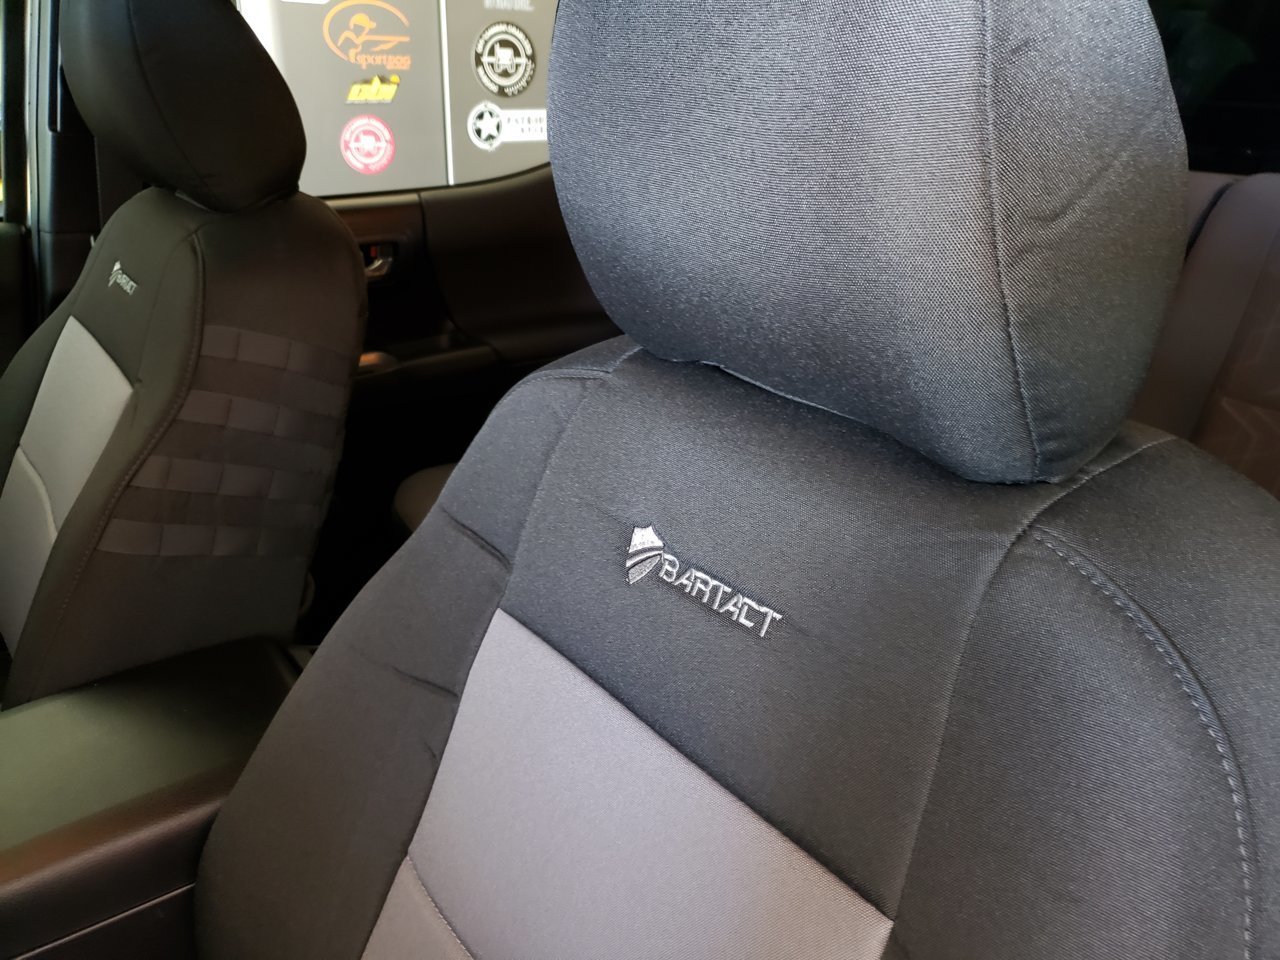 Which aftermarket seat covers fit the best, reasonably priced. | Page 2 | Tacoma World 2019 Toyota Tacoma Trd Off Road Seat Covers